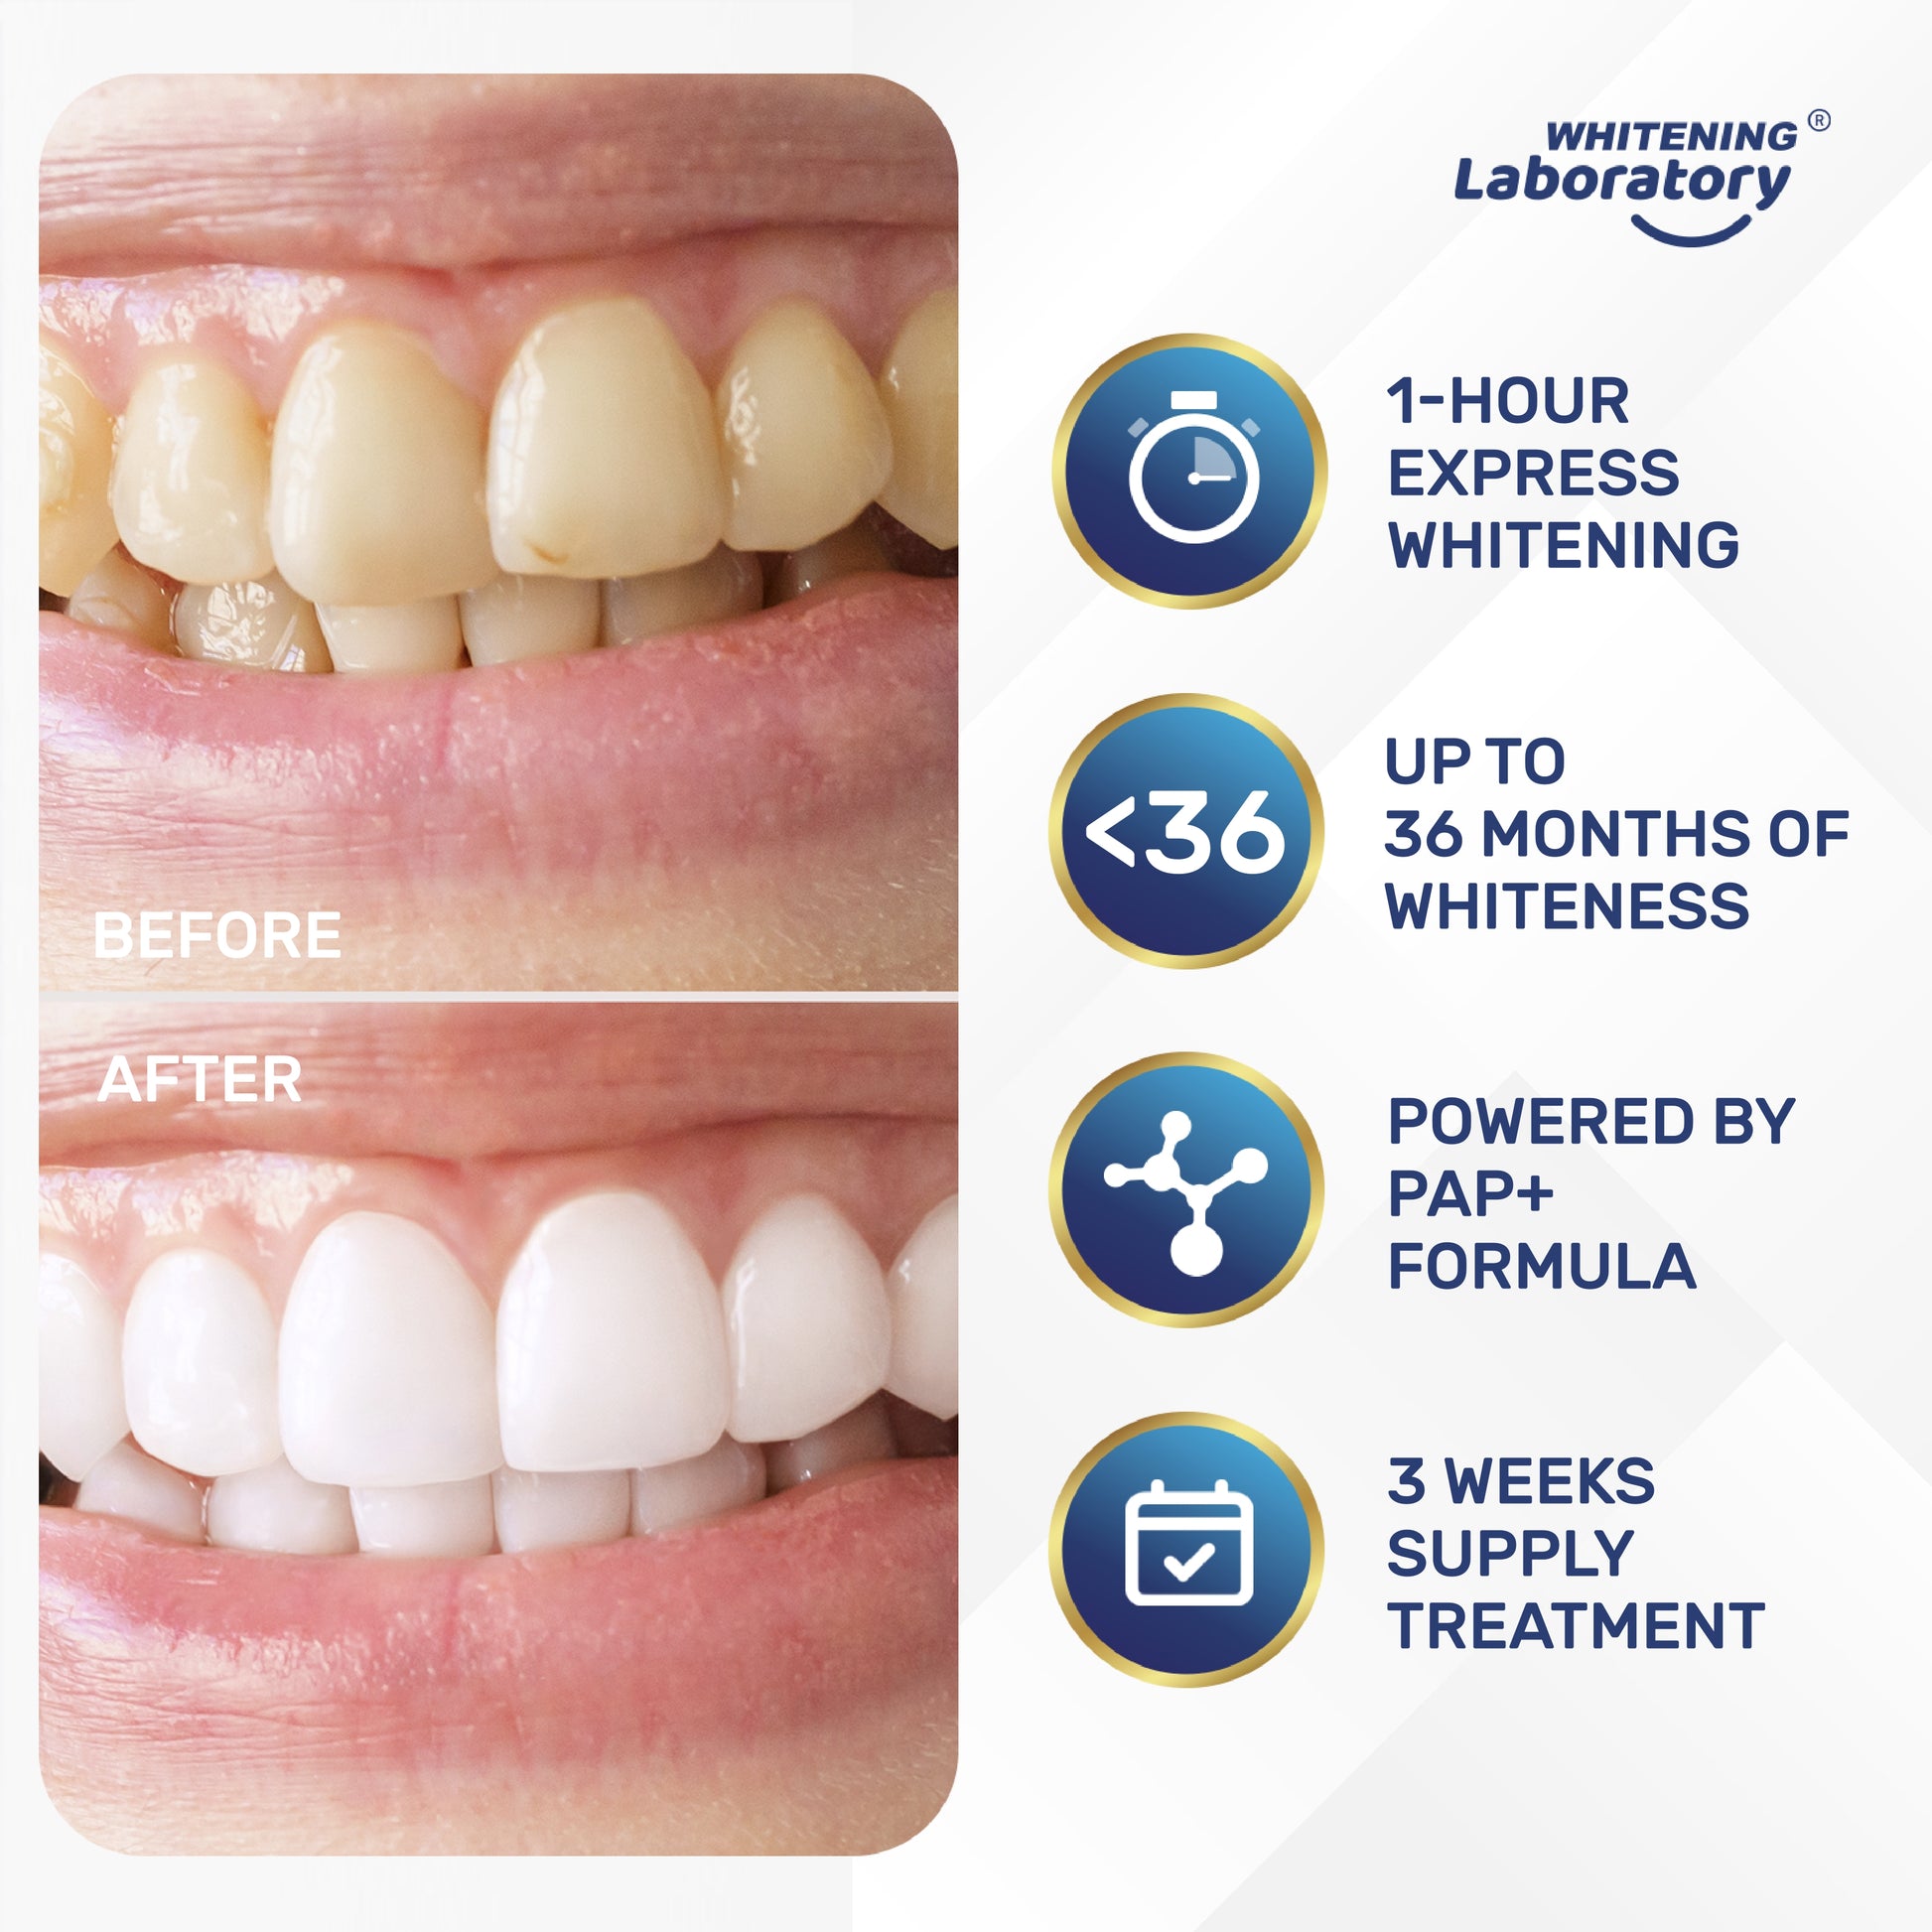 Before and after comparison of teeth whitening results with Whitening Laboratory strips, demonstrating effectiveness over a 3-week treatment period.